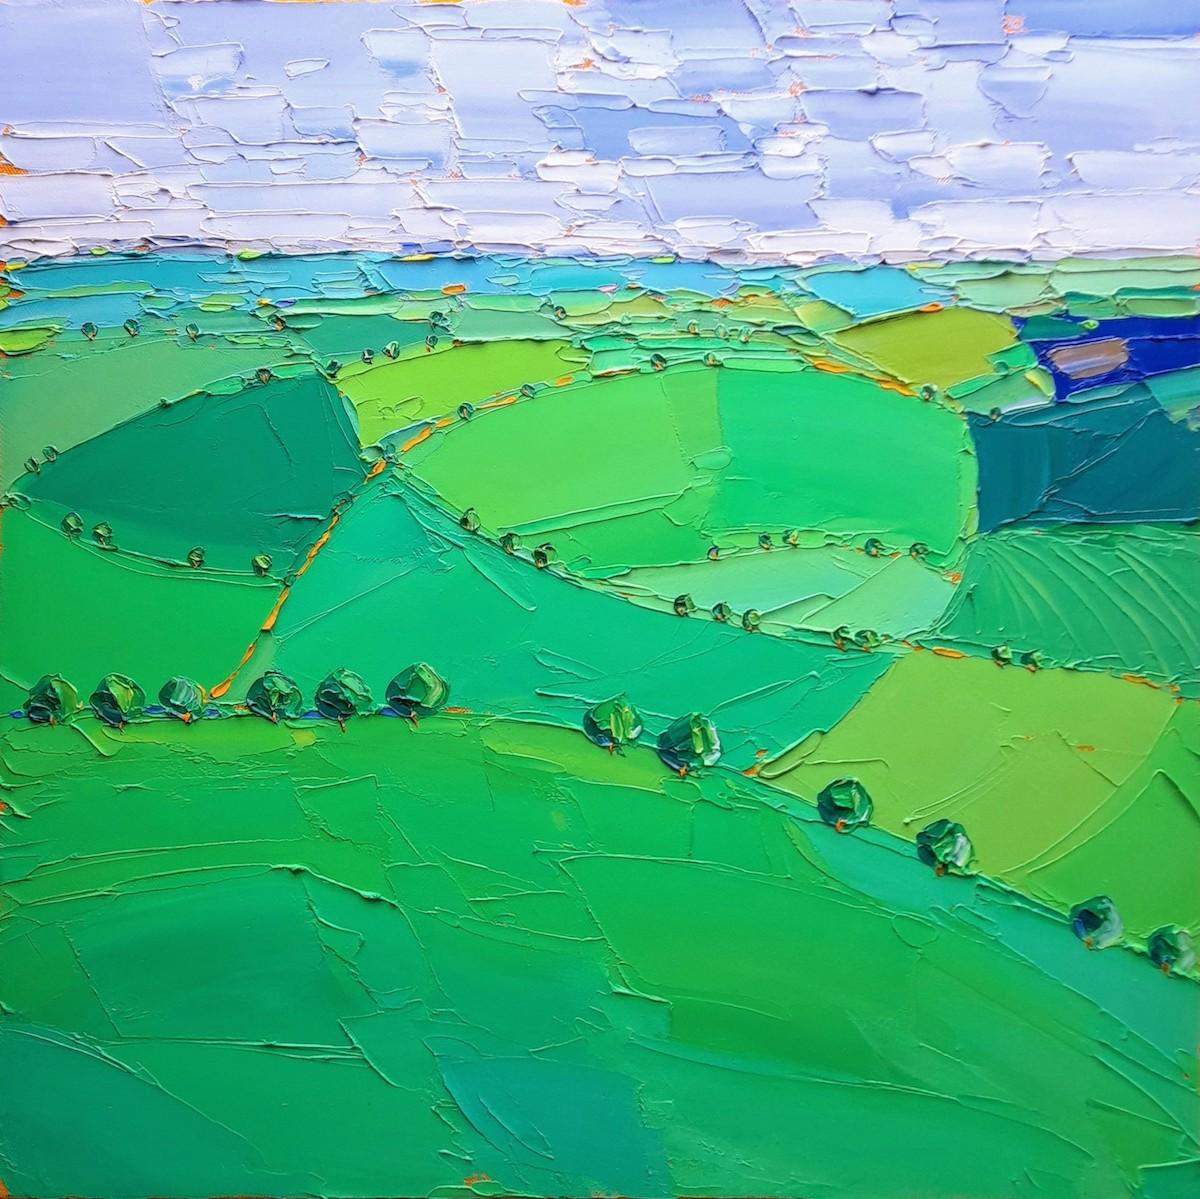 Georgie Dowling  Landscape Painting - Cotswold Fields II, Georgie Dowling, Contemporary artist, Cotswold art, 2022